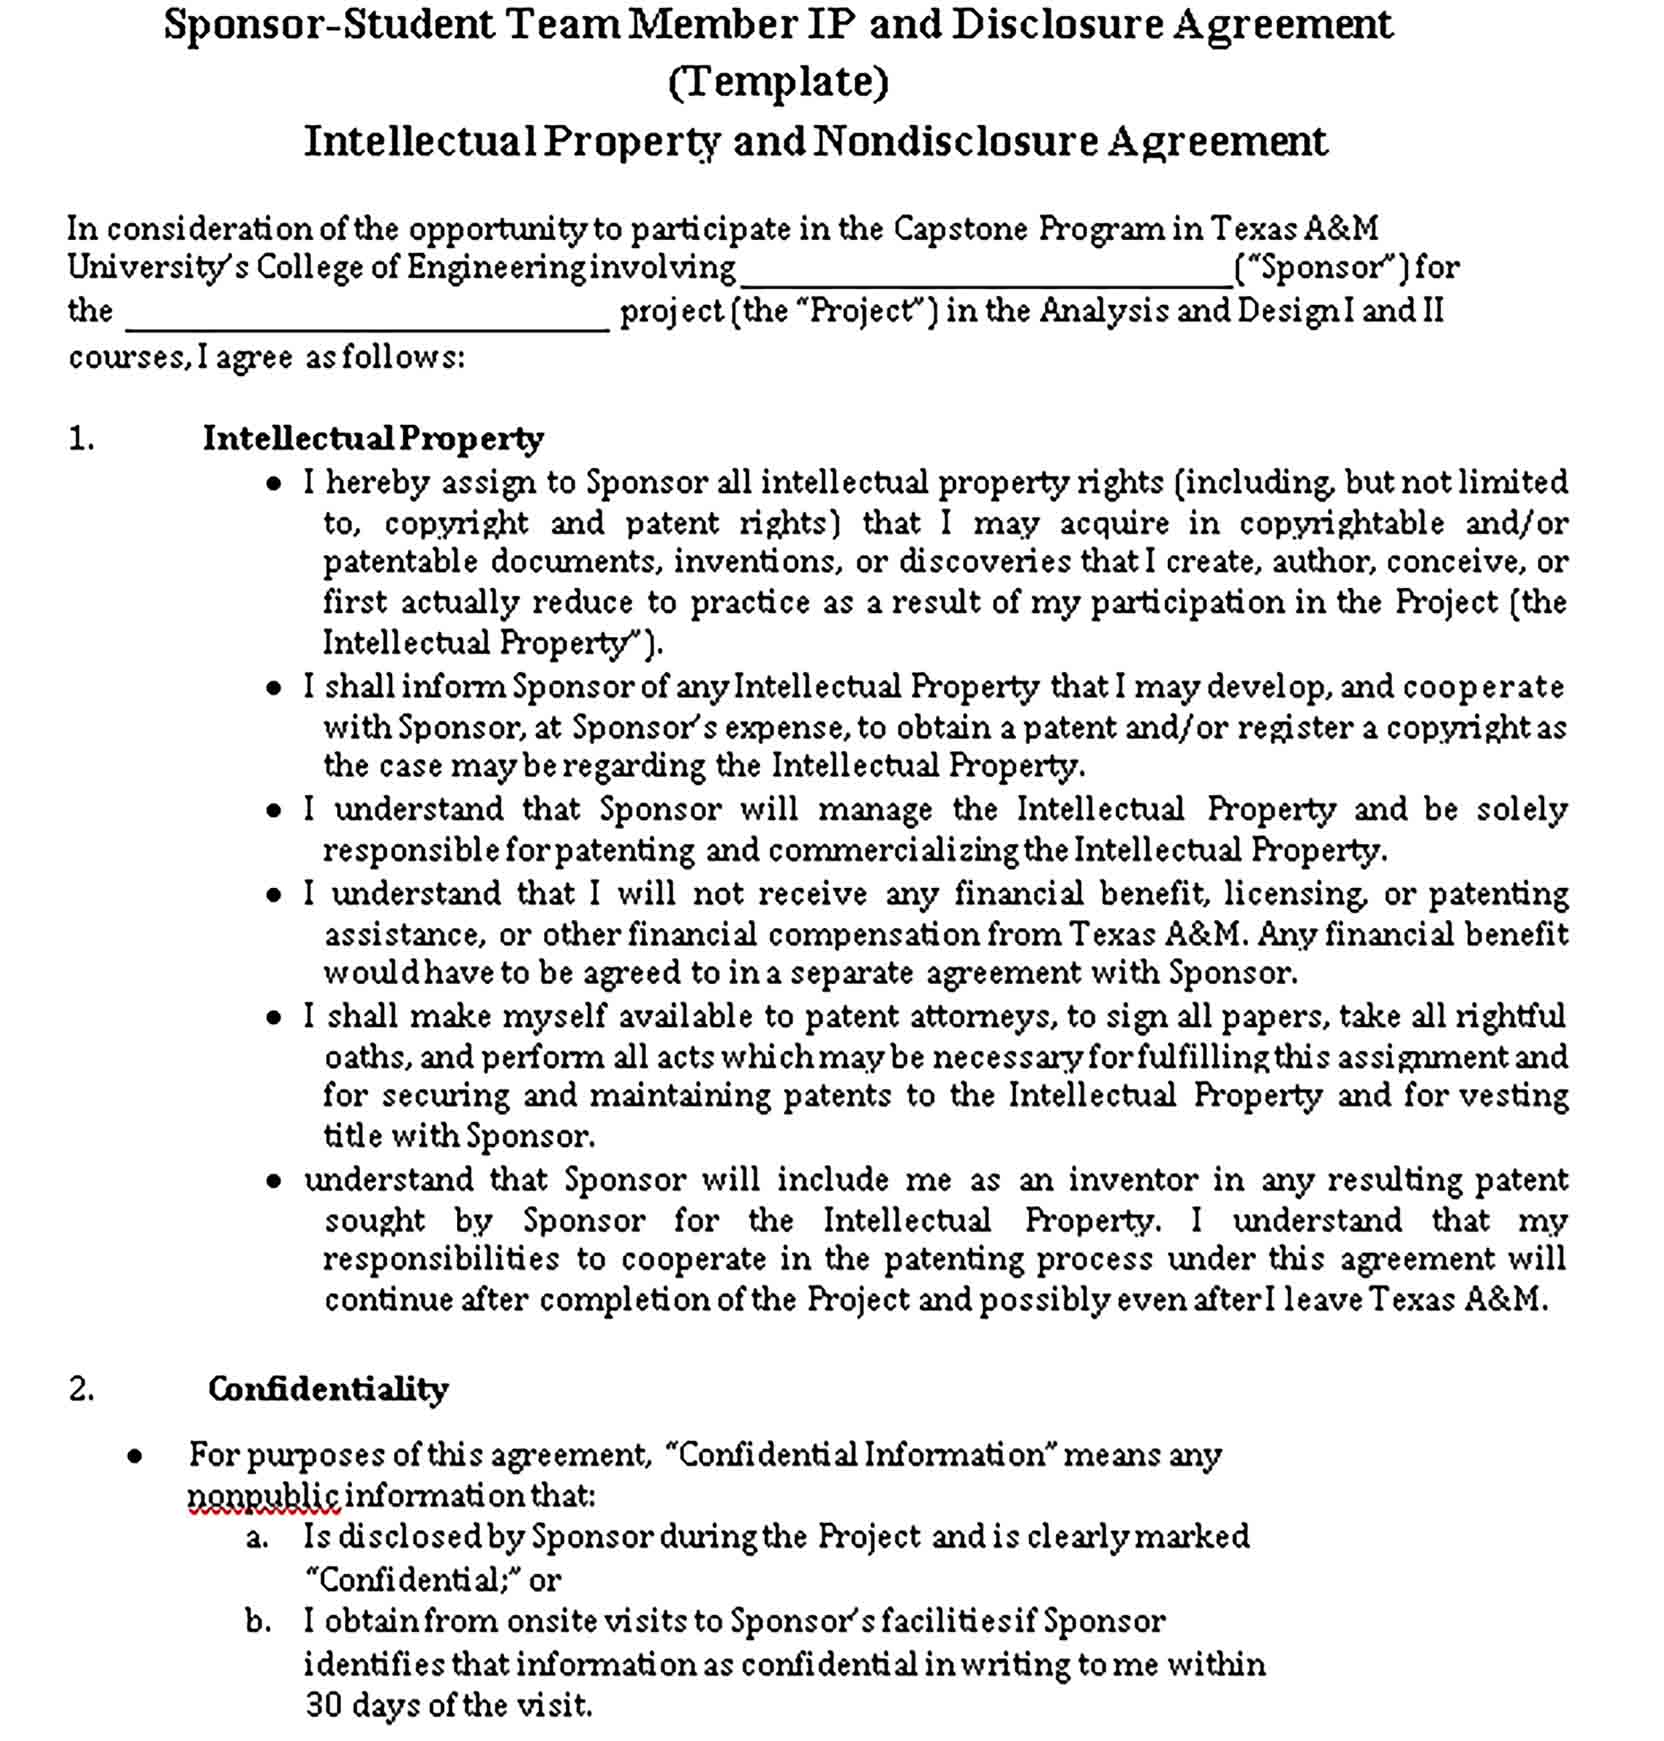 Templates Intellectual Property and Nondisclosure Agreement Sample